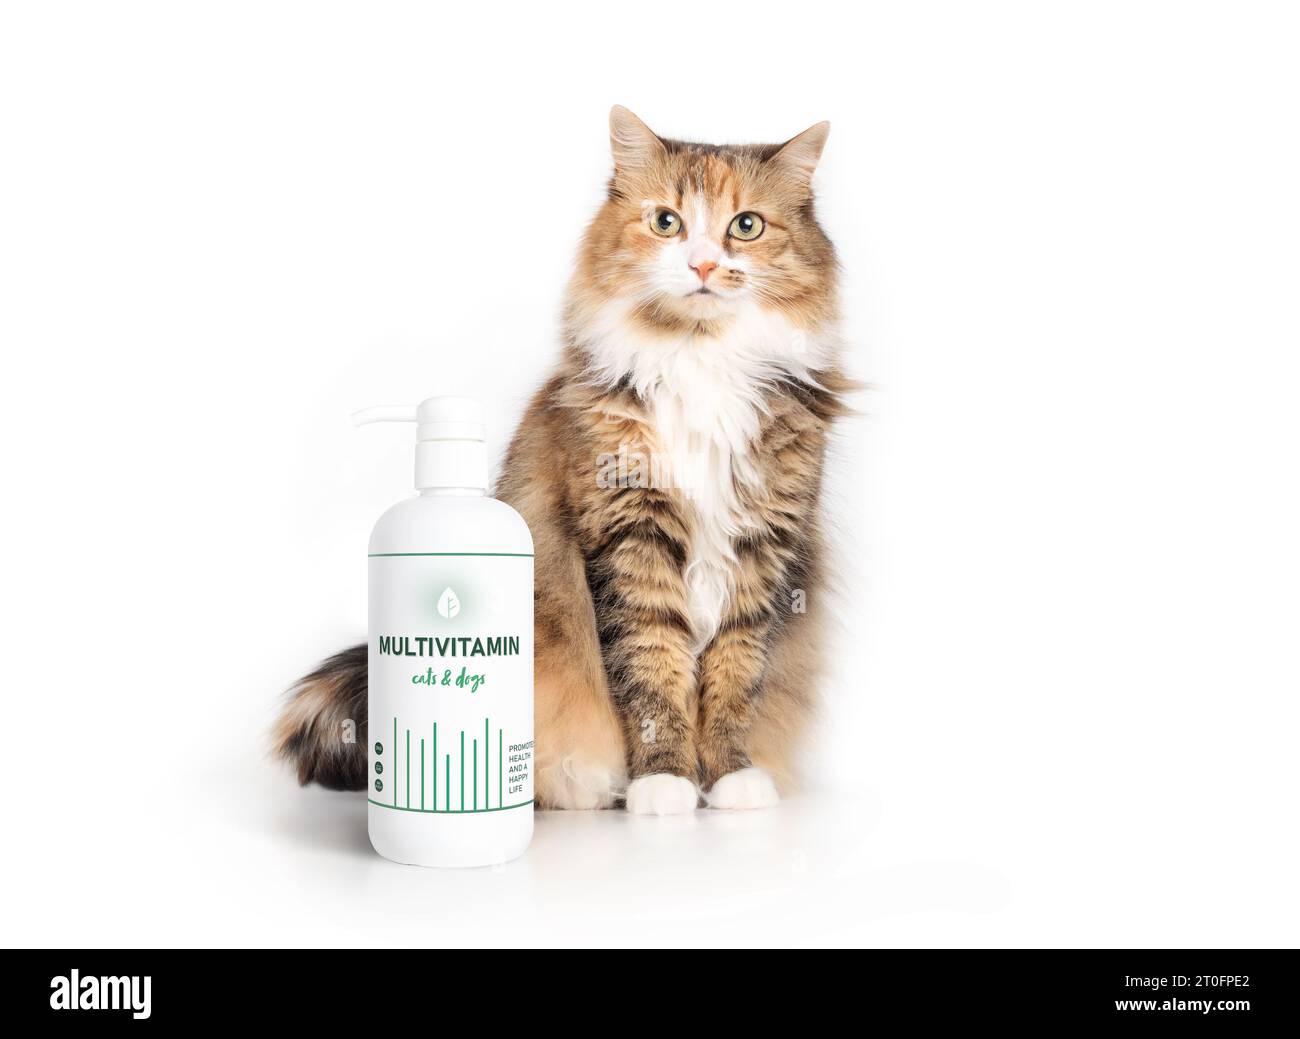 Cute cat with multivitamin supplement bottle. Fluffy calico kitty sitting behind pump bottle with fake pet supplement label for cats and dogs to promo Stock Photo